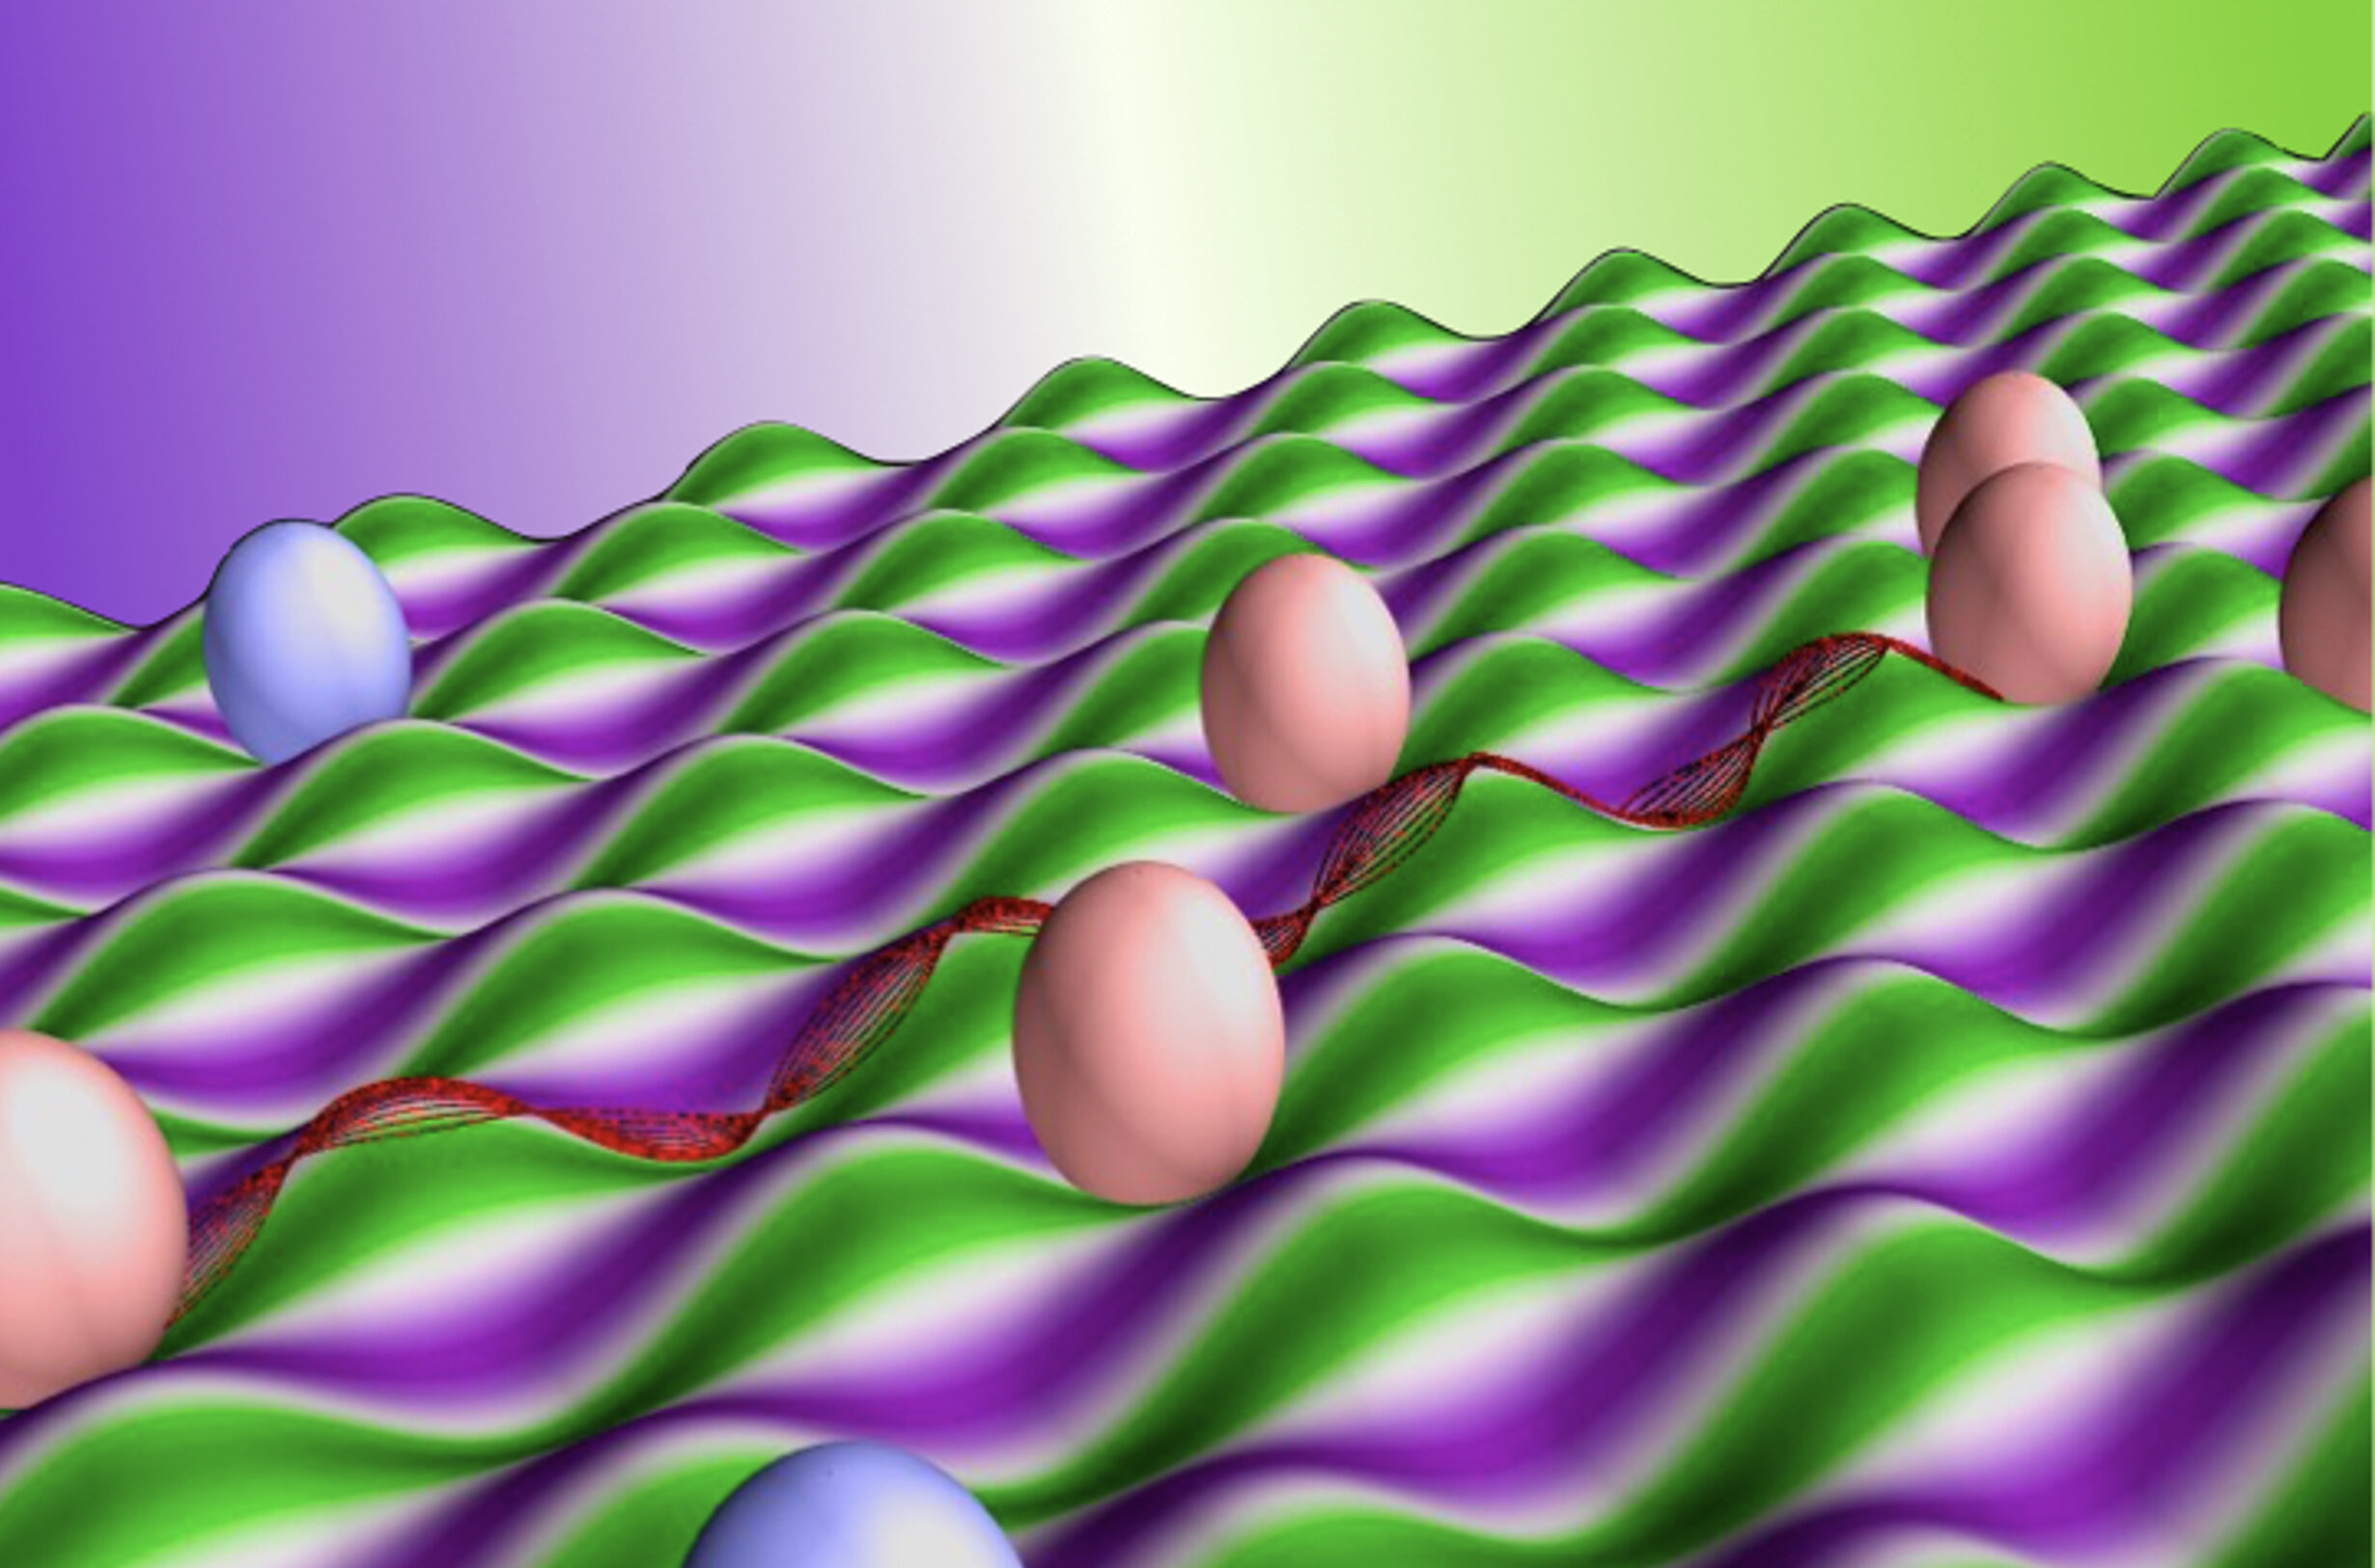 Distinctive electronics made potential by wavy patterns that channel electrons